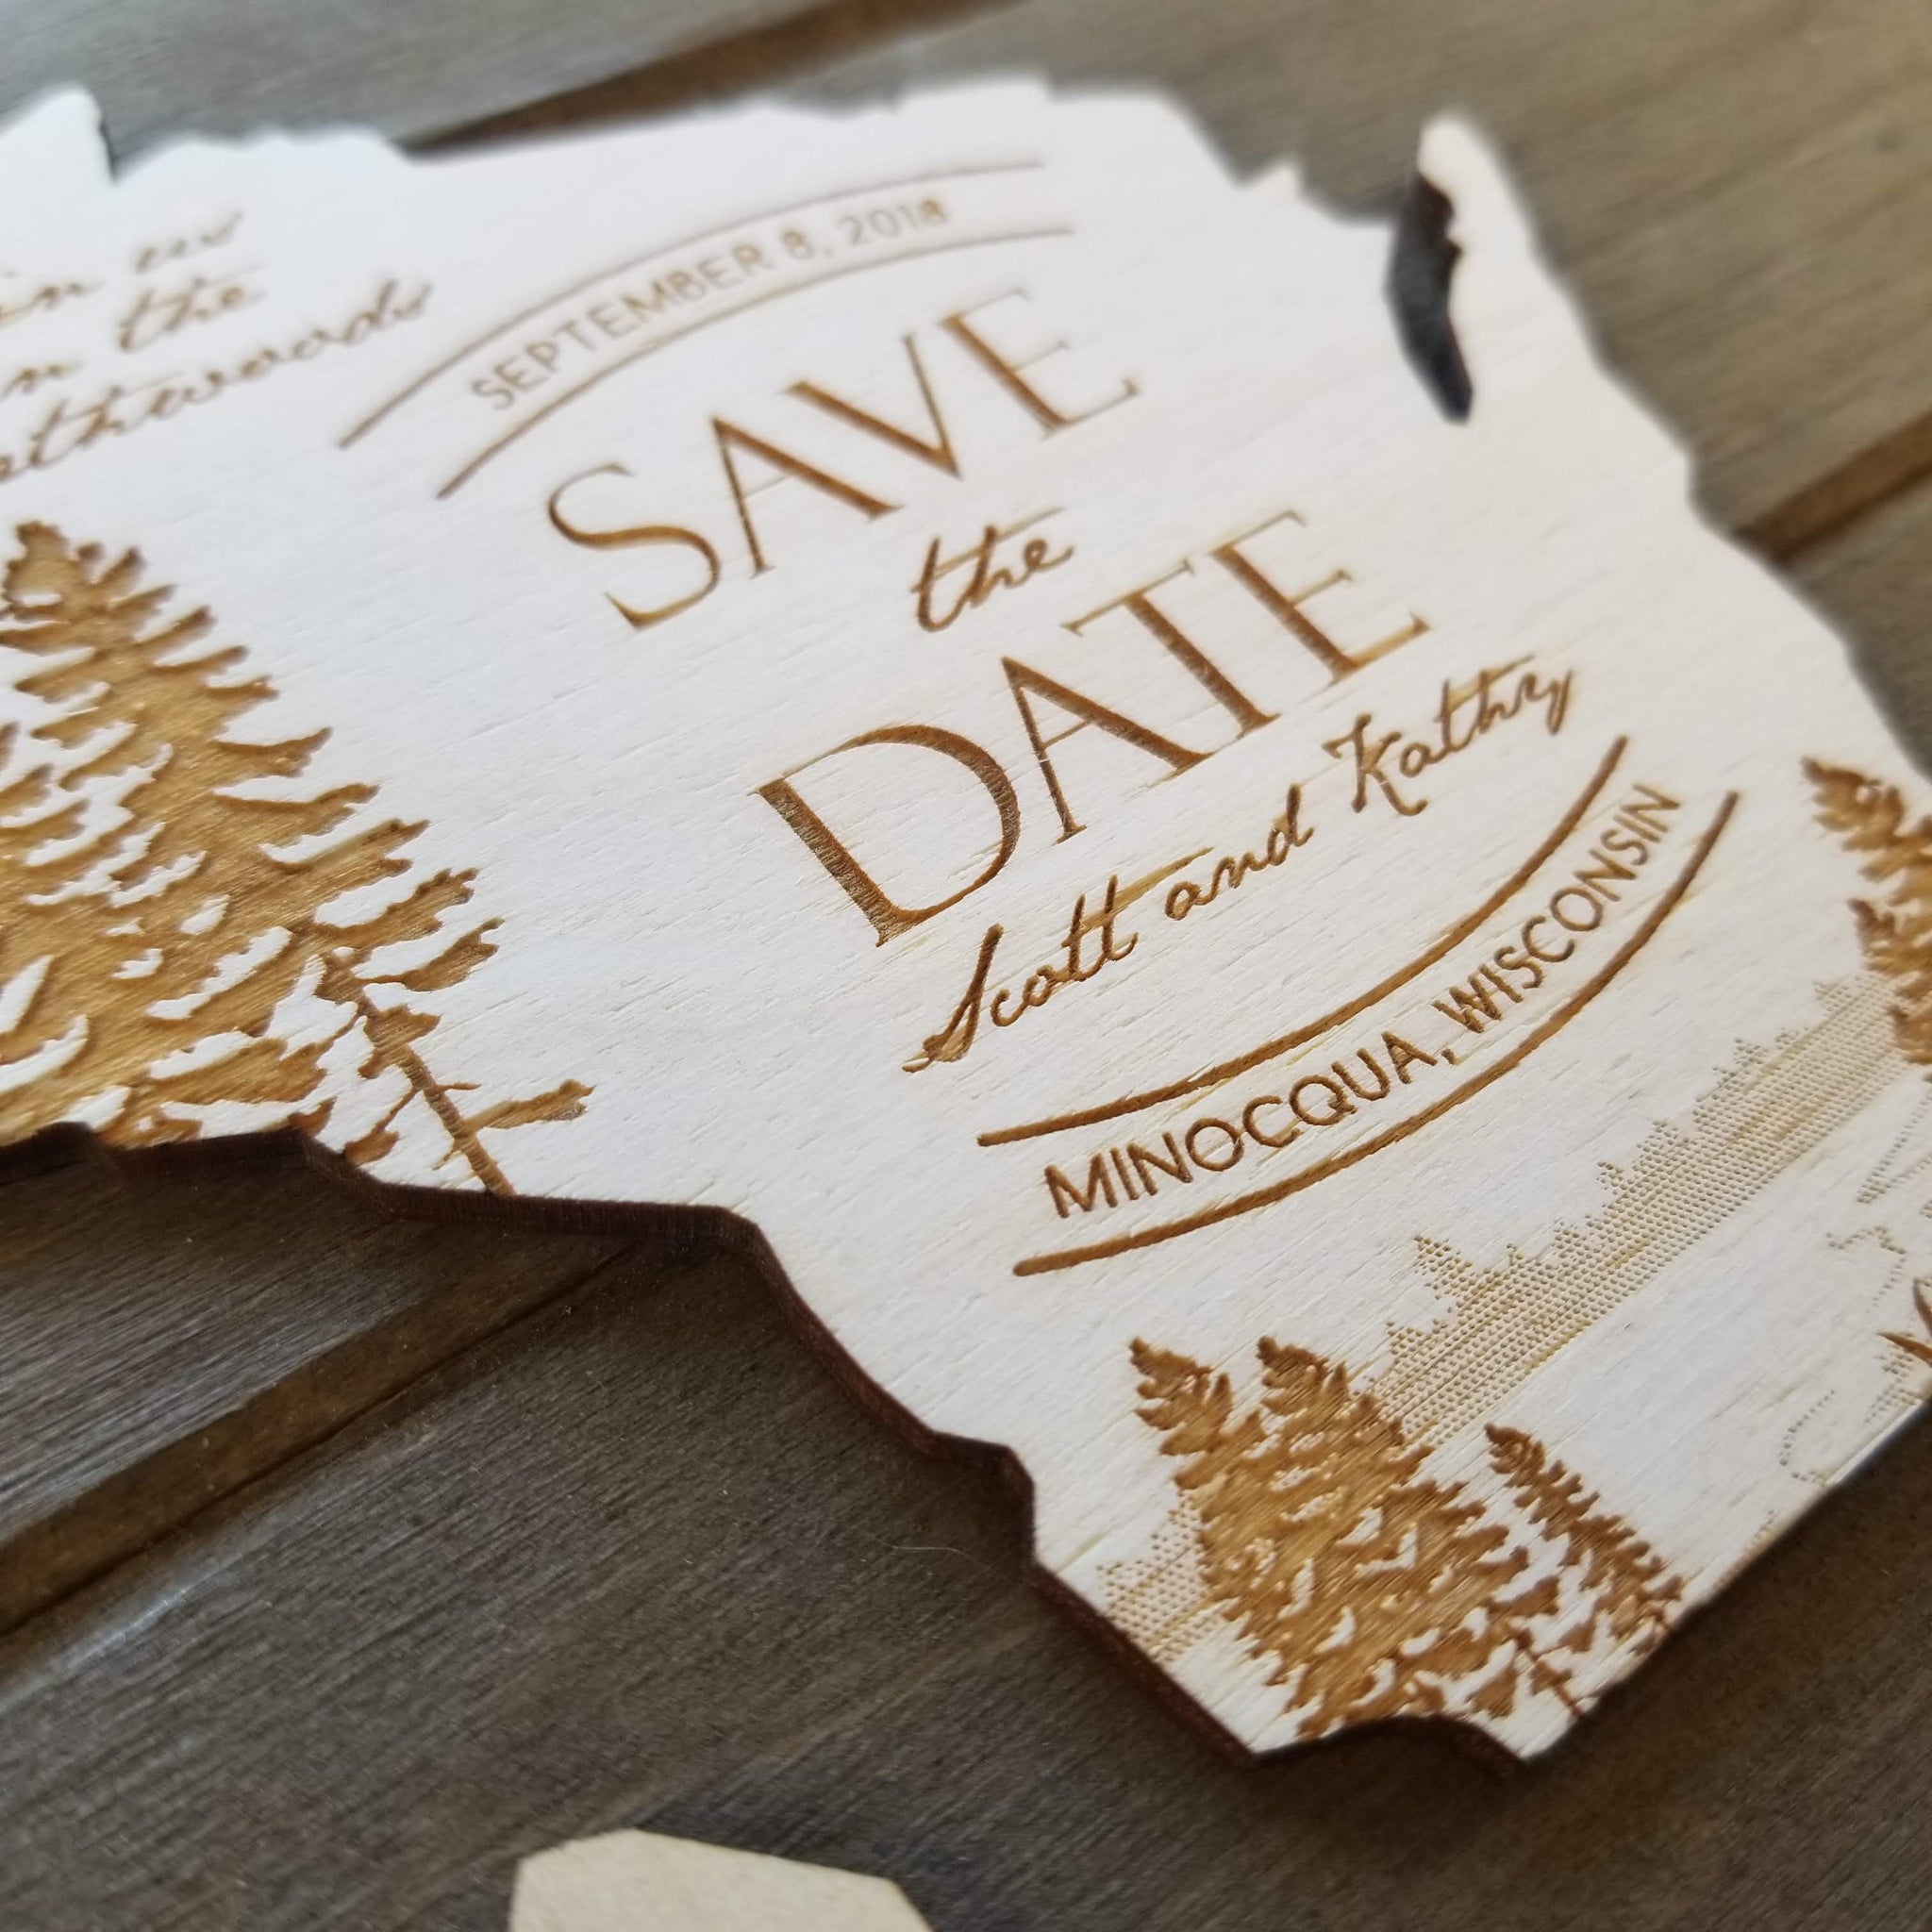 Wedding Save The Date Magnets with Cards